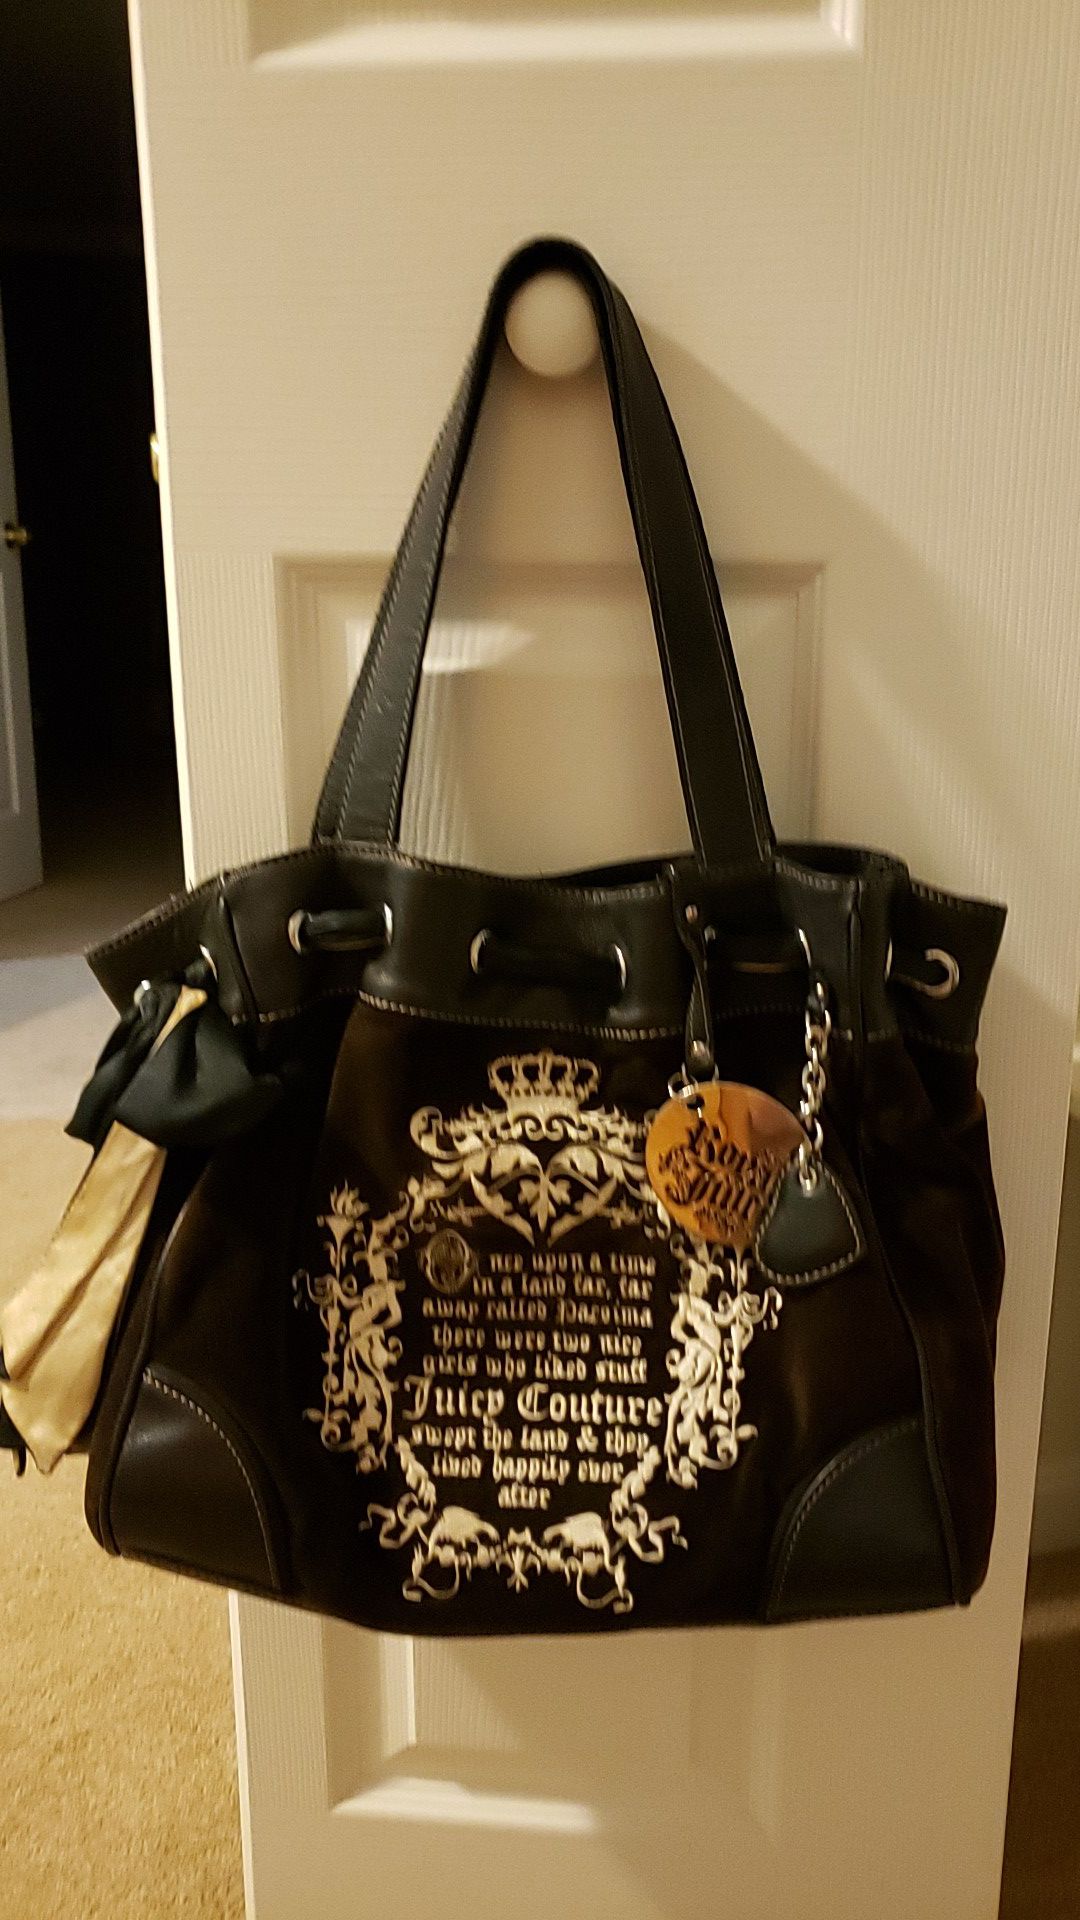 Juicy couture purse